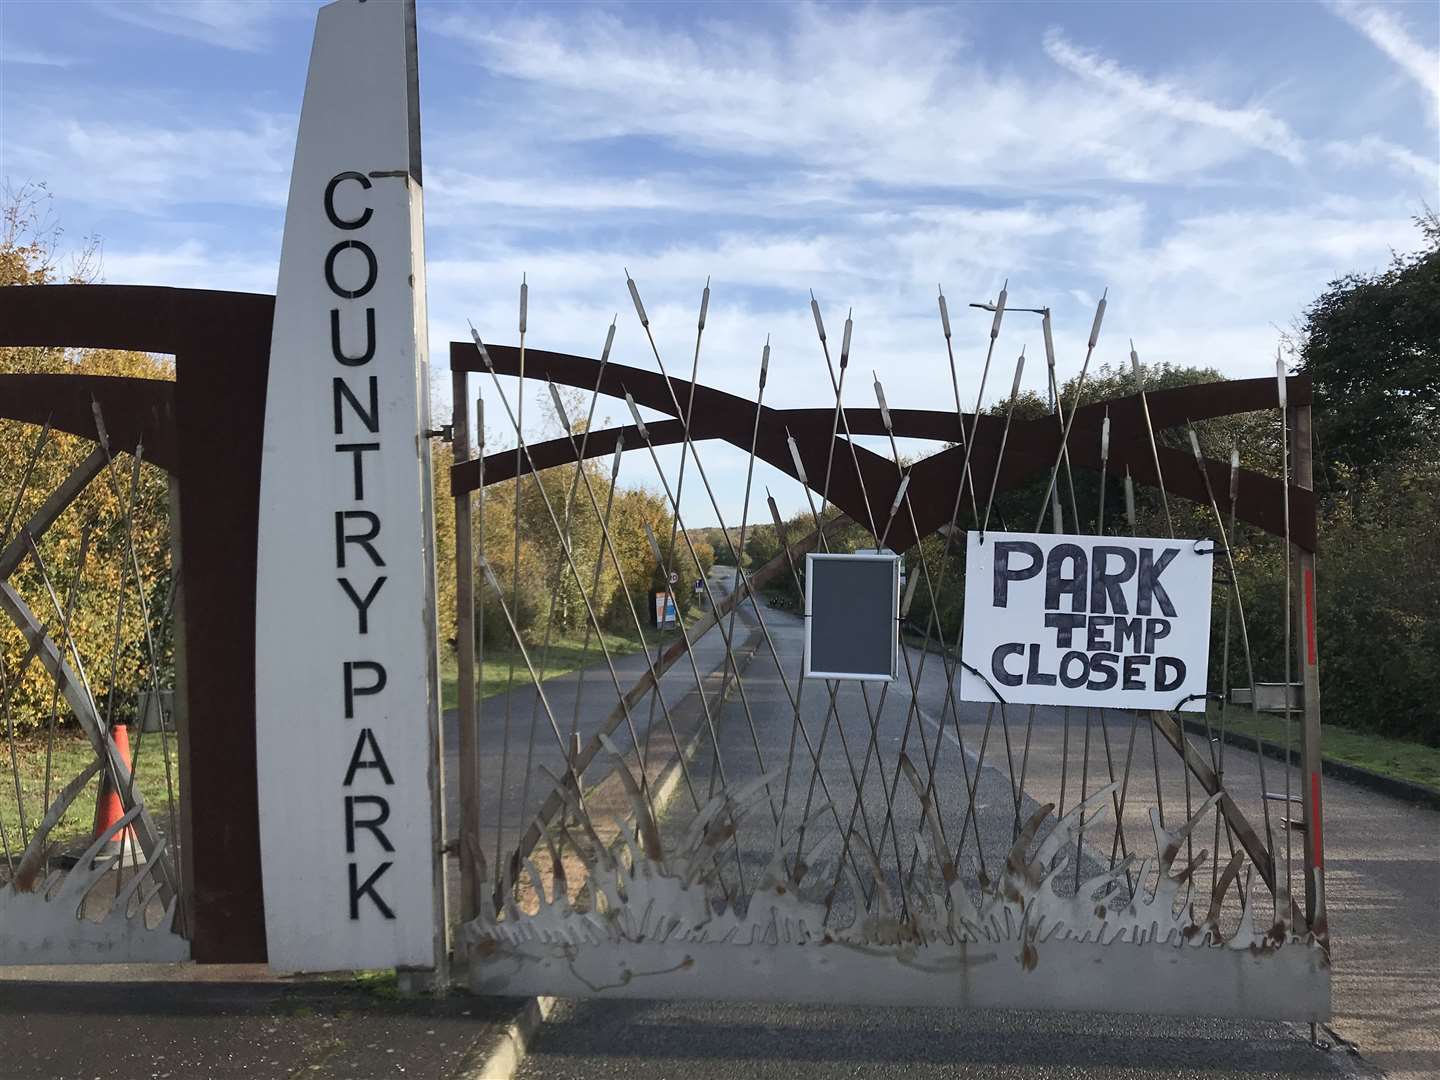 Betteshanger Park in Deal is closed due to an incursion of travellers